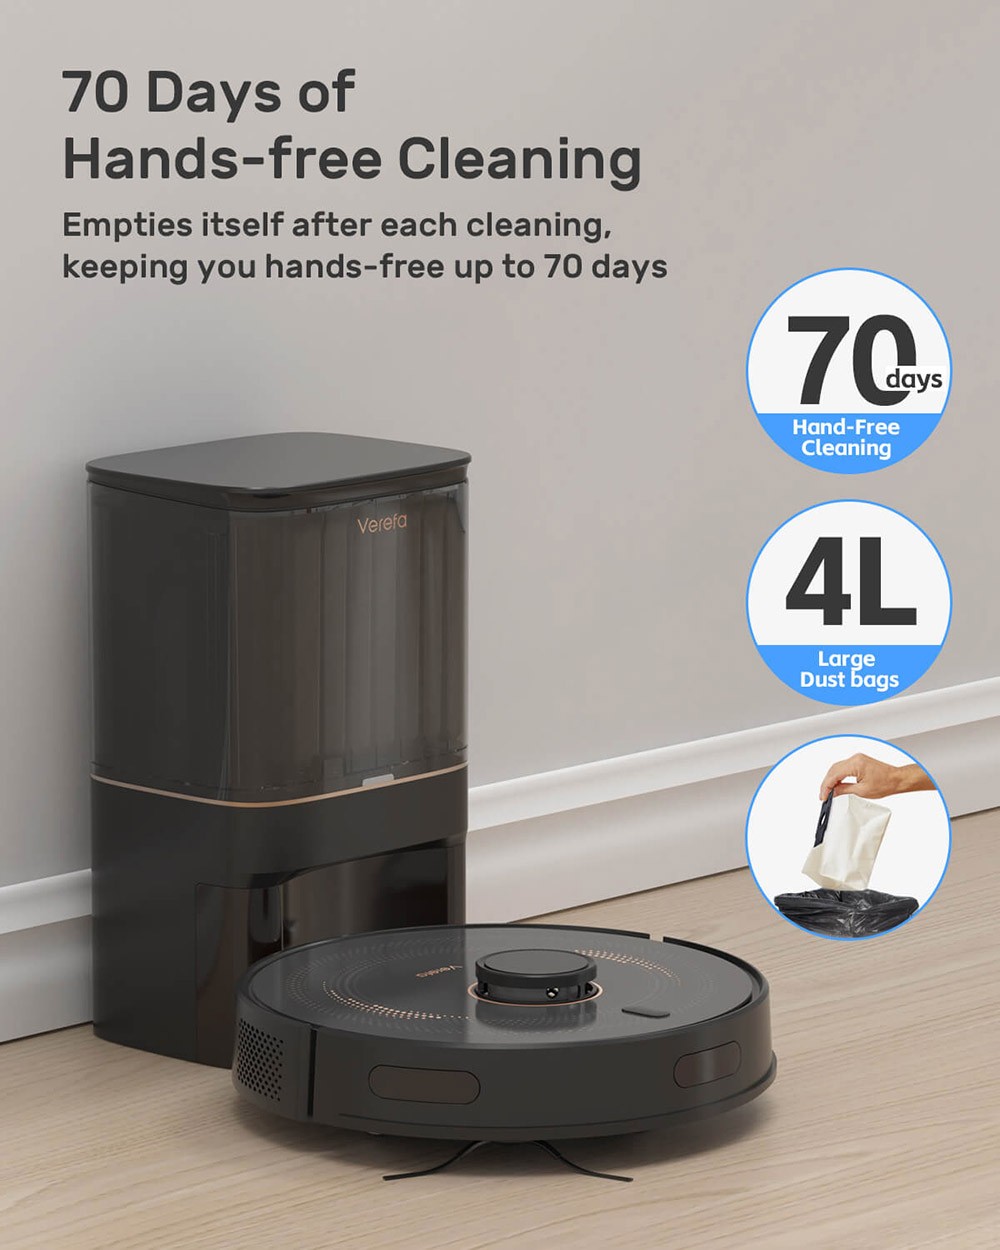 Verefa L11 Pro Robot Vacuum Cleaner, Self Emptying, 3000Pa Suction, LiDAR Navigation, 4L Dust Bag, Max 270 Mins Runtime, 70 Days Hands-Free Cleaning, App / Voice Control